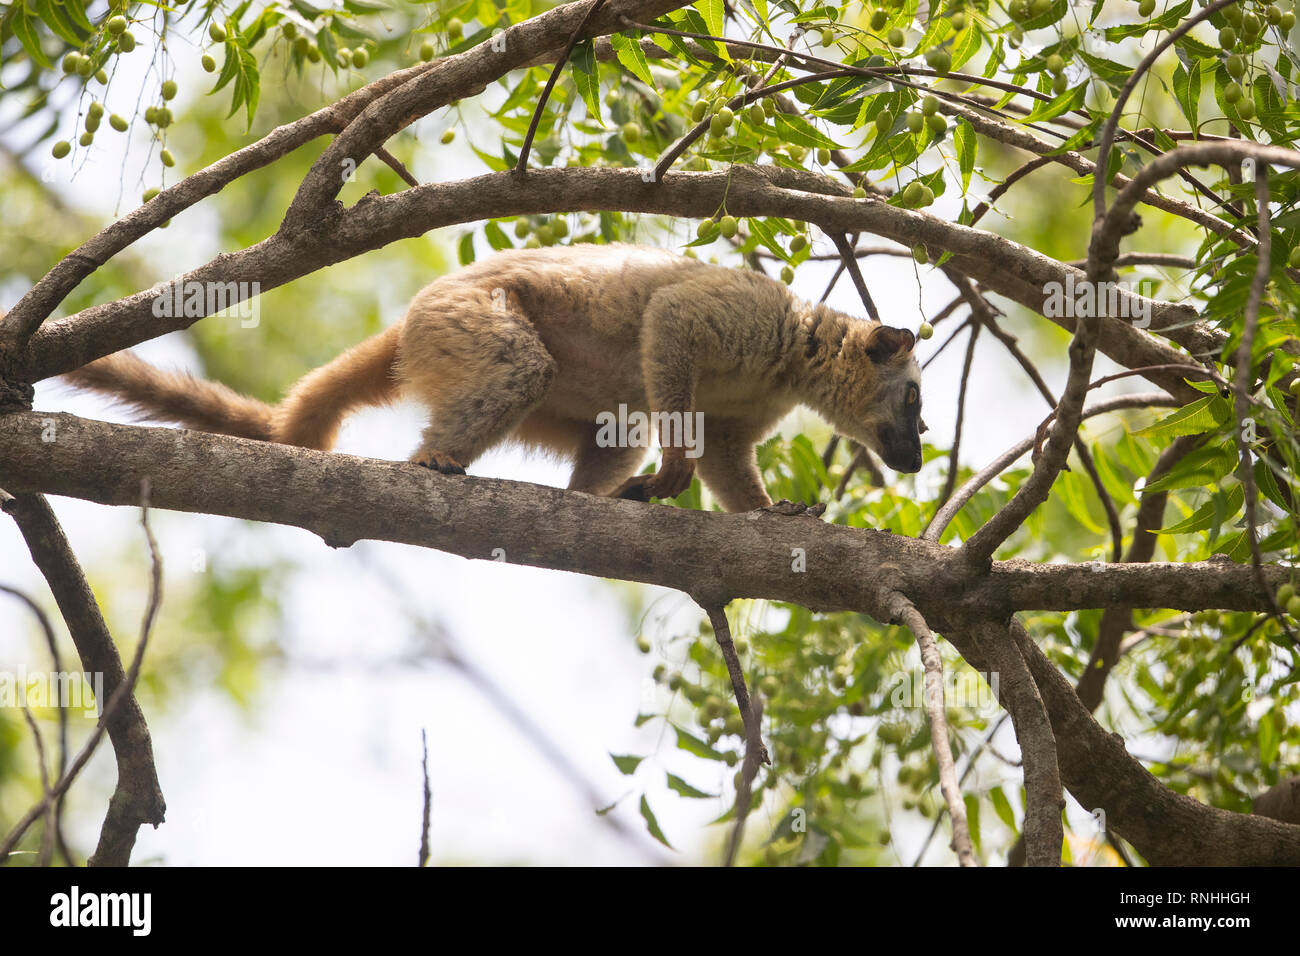 Red-fronted Lemur (Eulemur rufifrons) Stockfoto